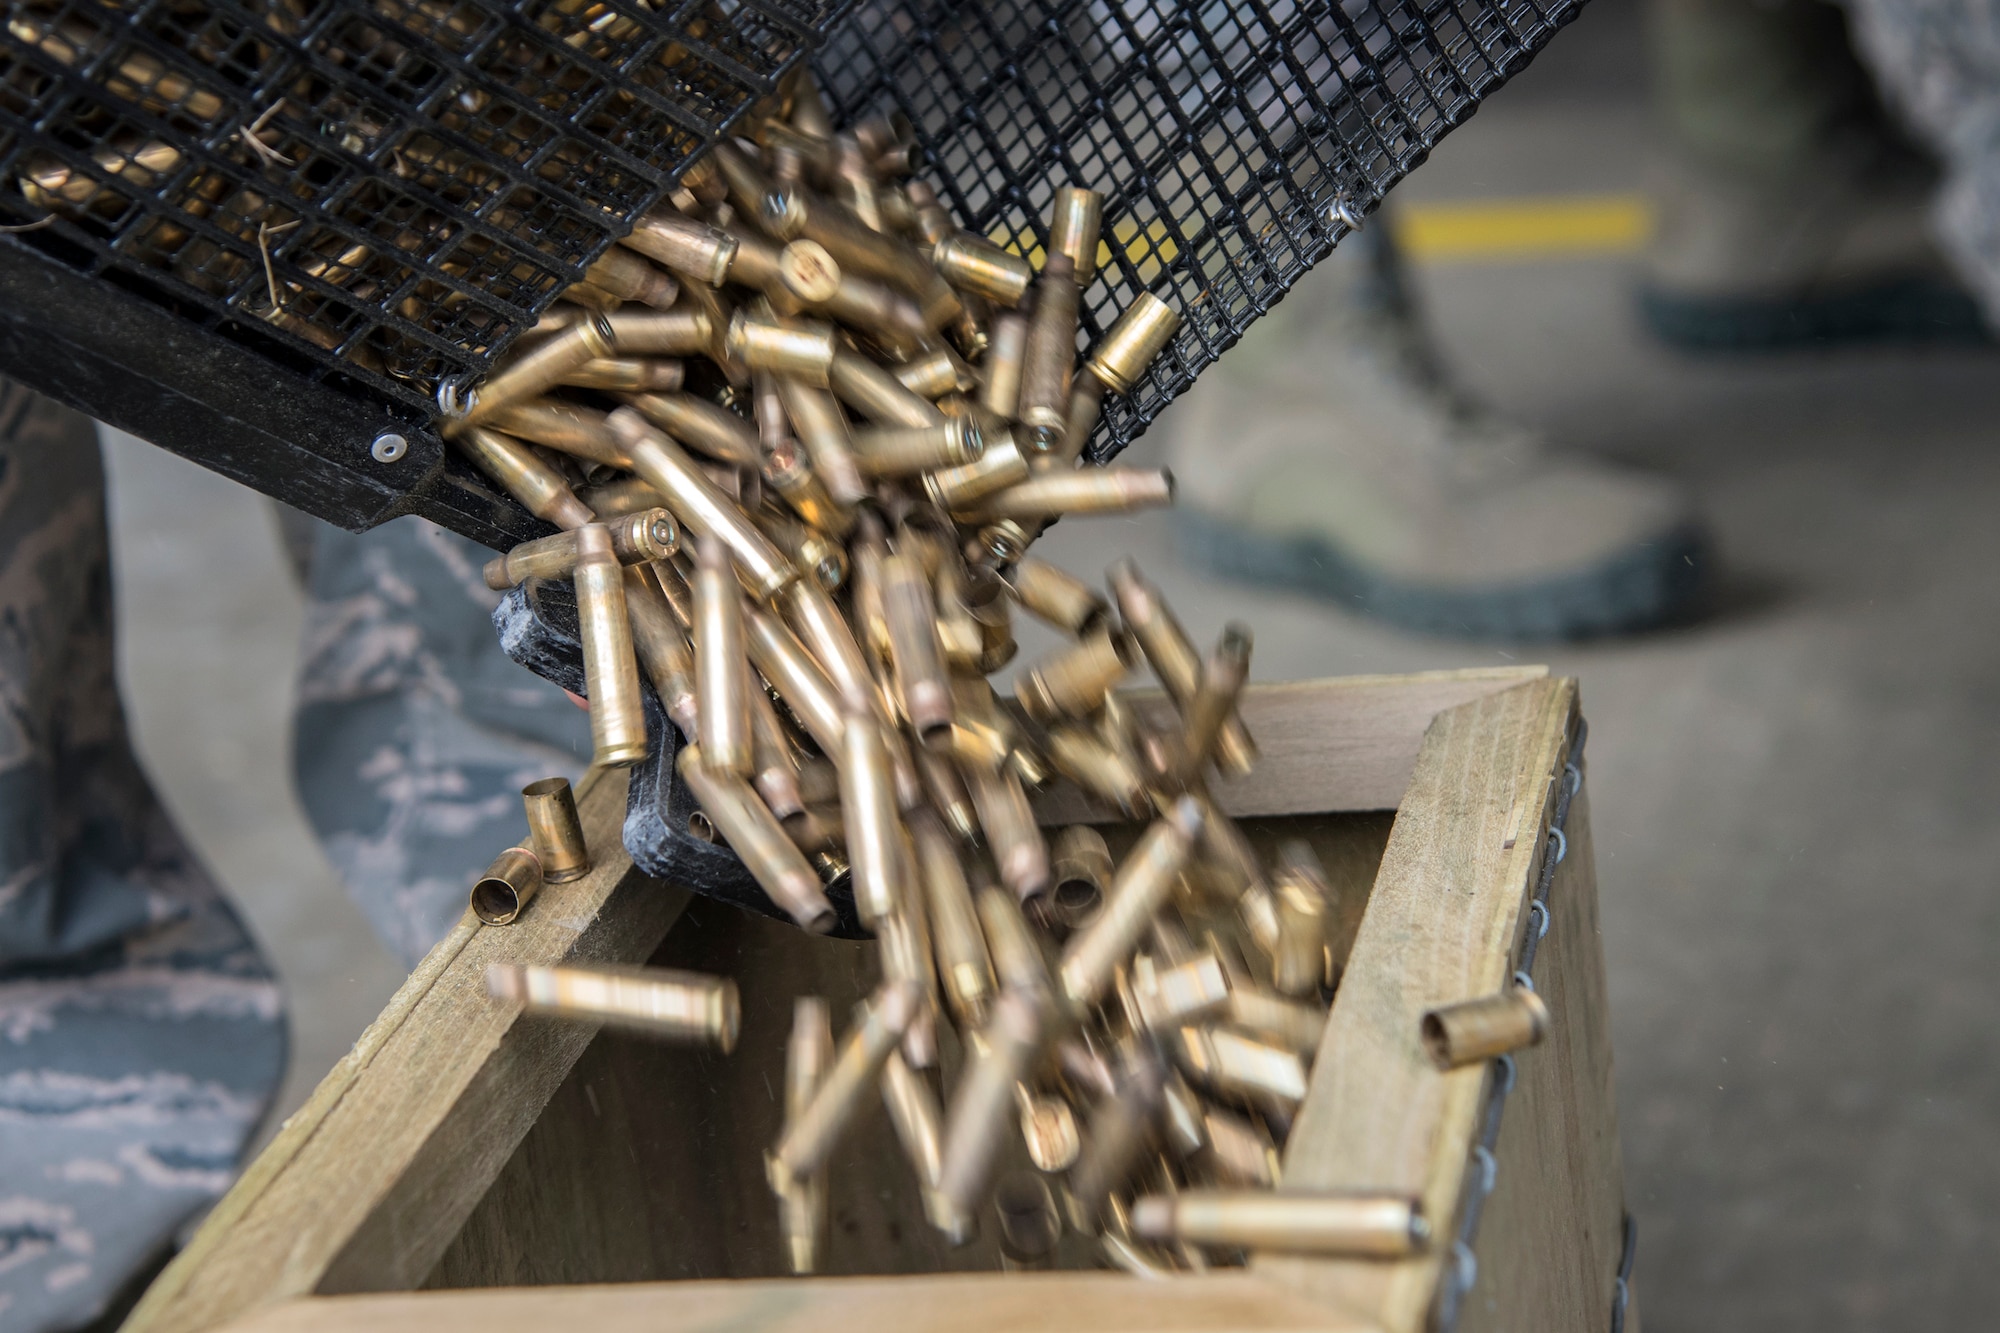 Bullet casings fall into a wooden box following a Combat Arms Training and Maintenance (CATM) class, April 4, 2018, at Moody Air Force Base, Ga. Airmen must demonstrate quality safety standards while handling and shooting their weapons proficiently in order to be eligible to deploy. Throughout the class the instructors emphasized: weapon handling techniques, proper sight usage and internal weapon cleaning procedures. (U.S. Air Force photo by Airman Eugene Oliver)